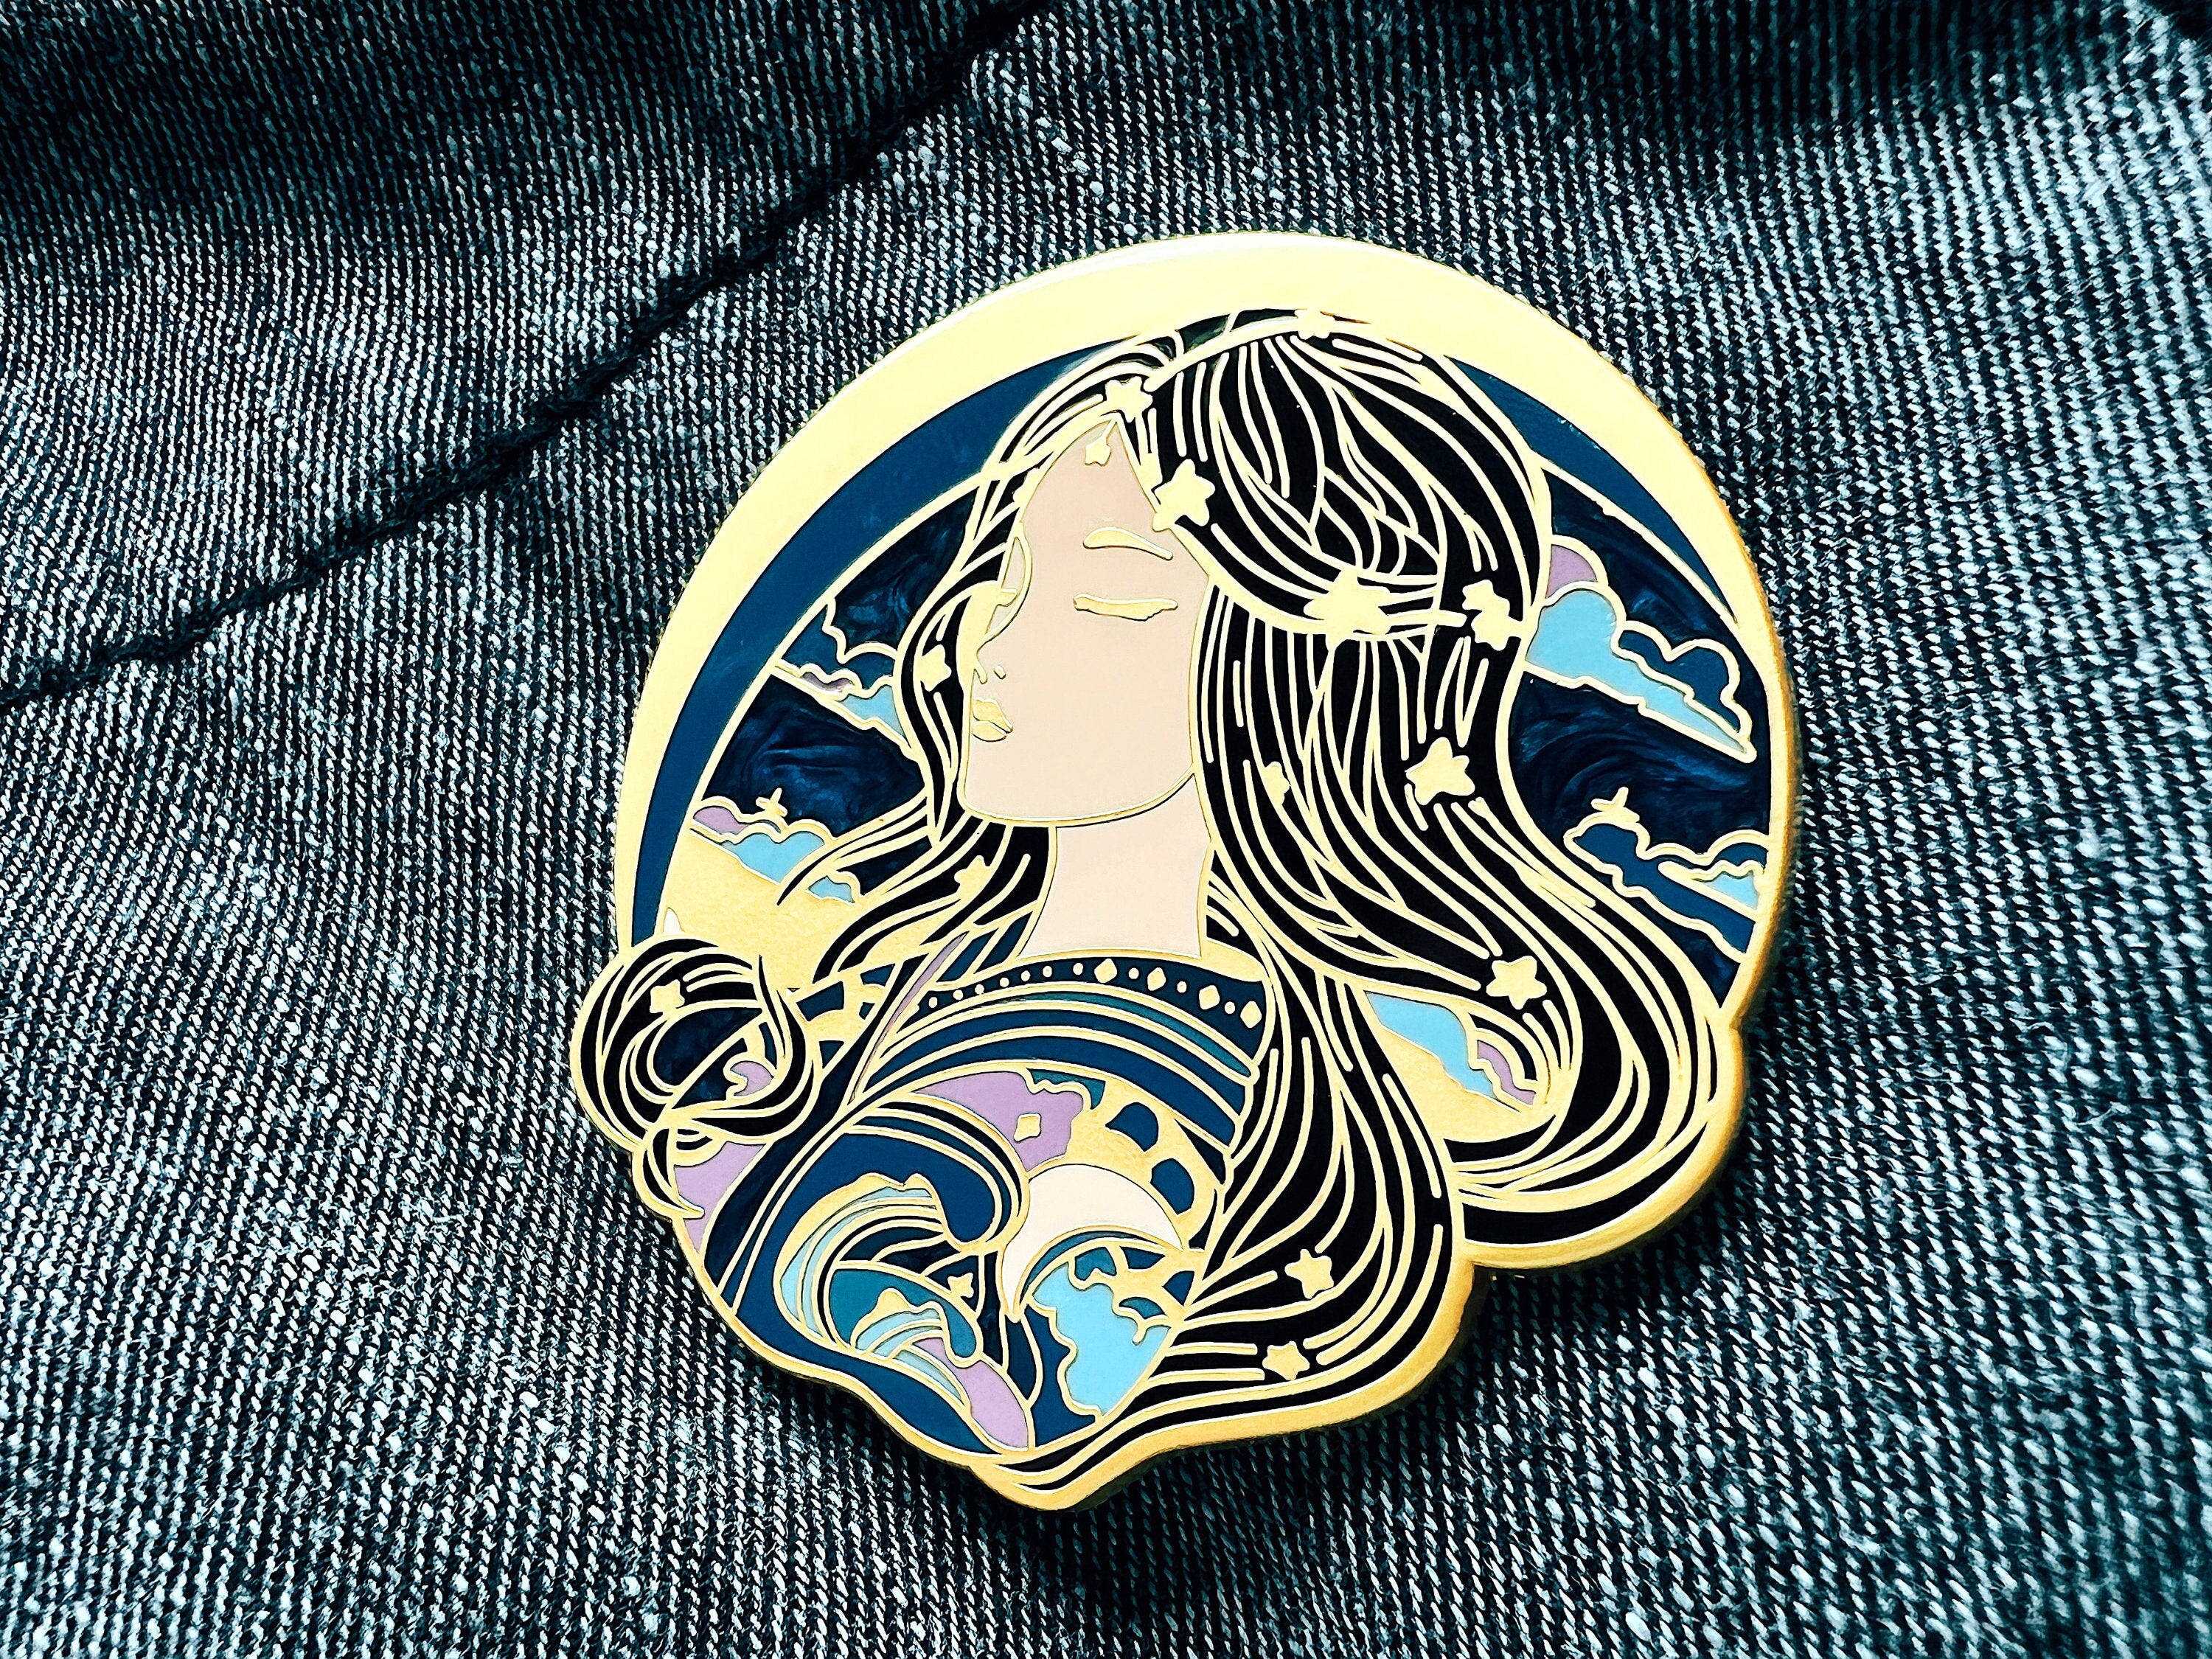 Star Empress Enamel Pin - Ethereal Princess and Celestial Lapel Pin - Art Nouveau Eastern Style Badge - The Sciencey